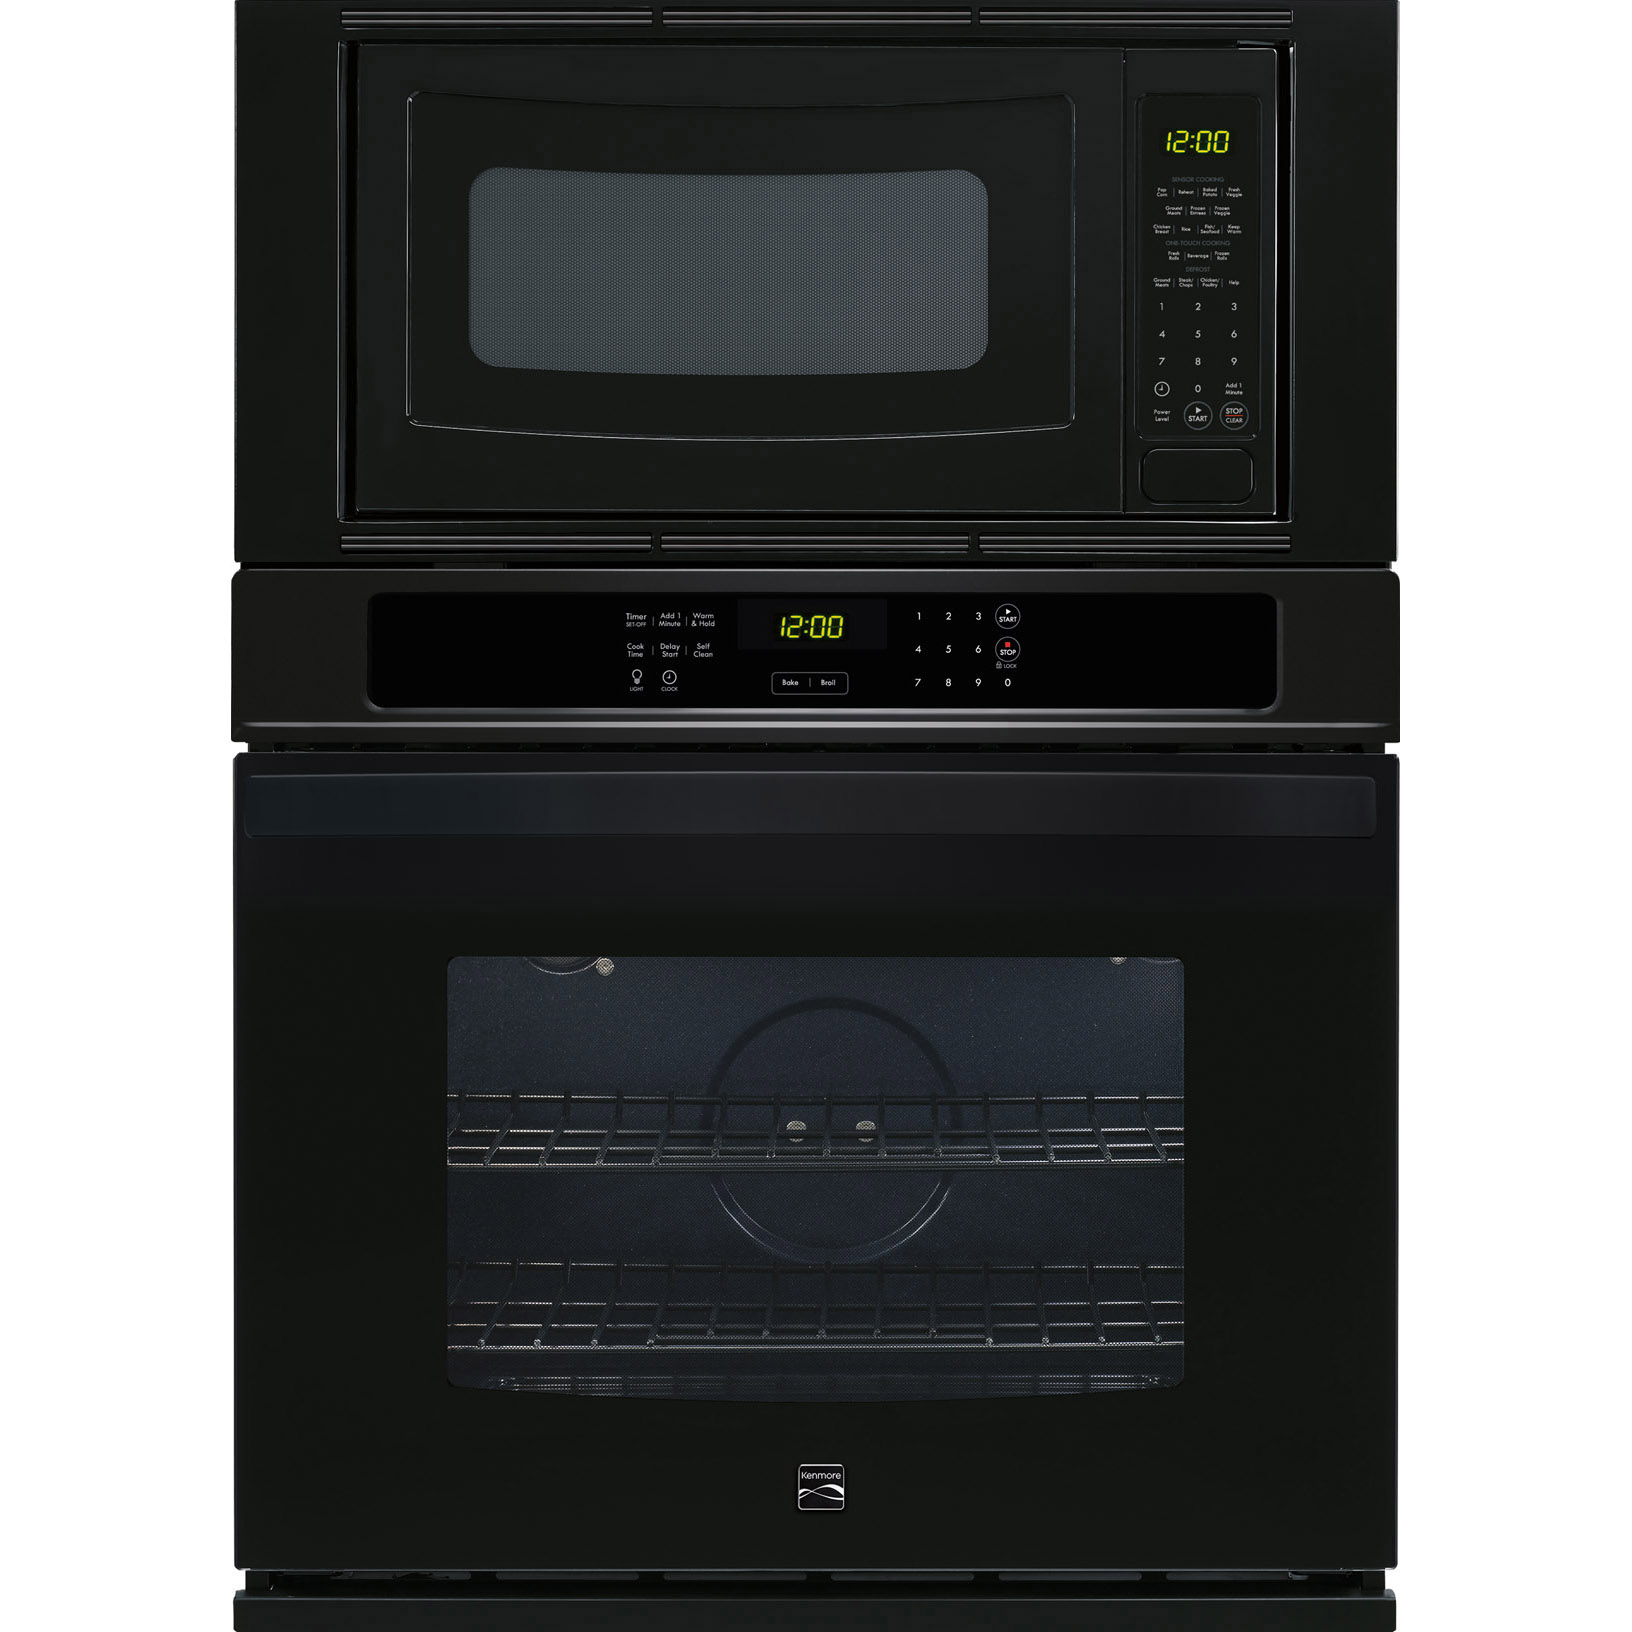 0012505801242 - 49619 30 ELECTRIC COMBINATION WALL OVEN - BLACK